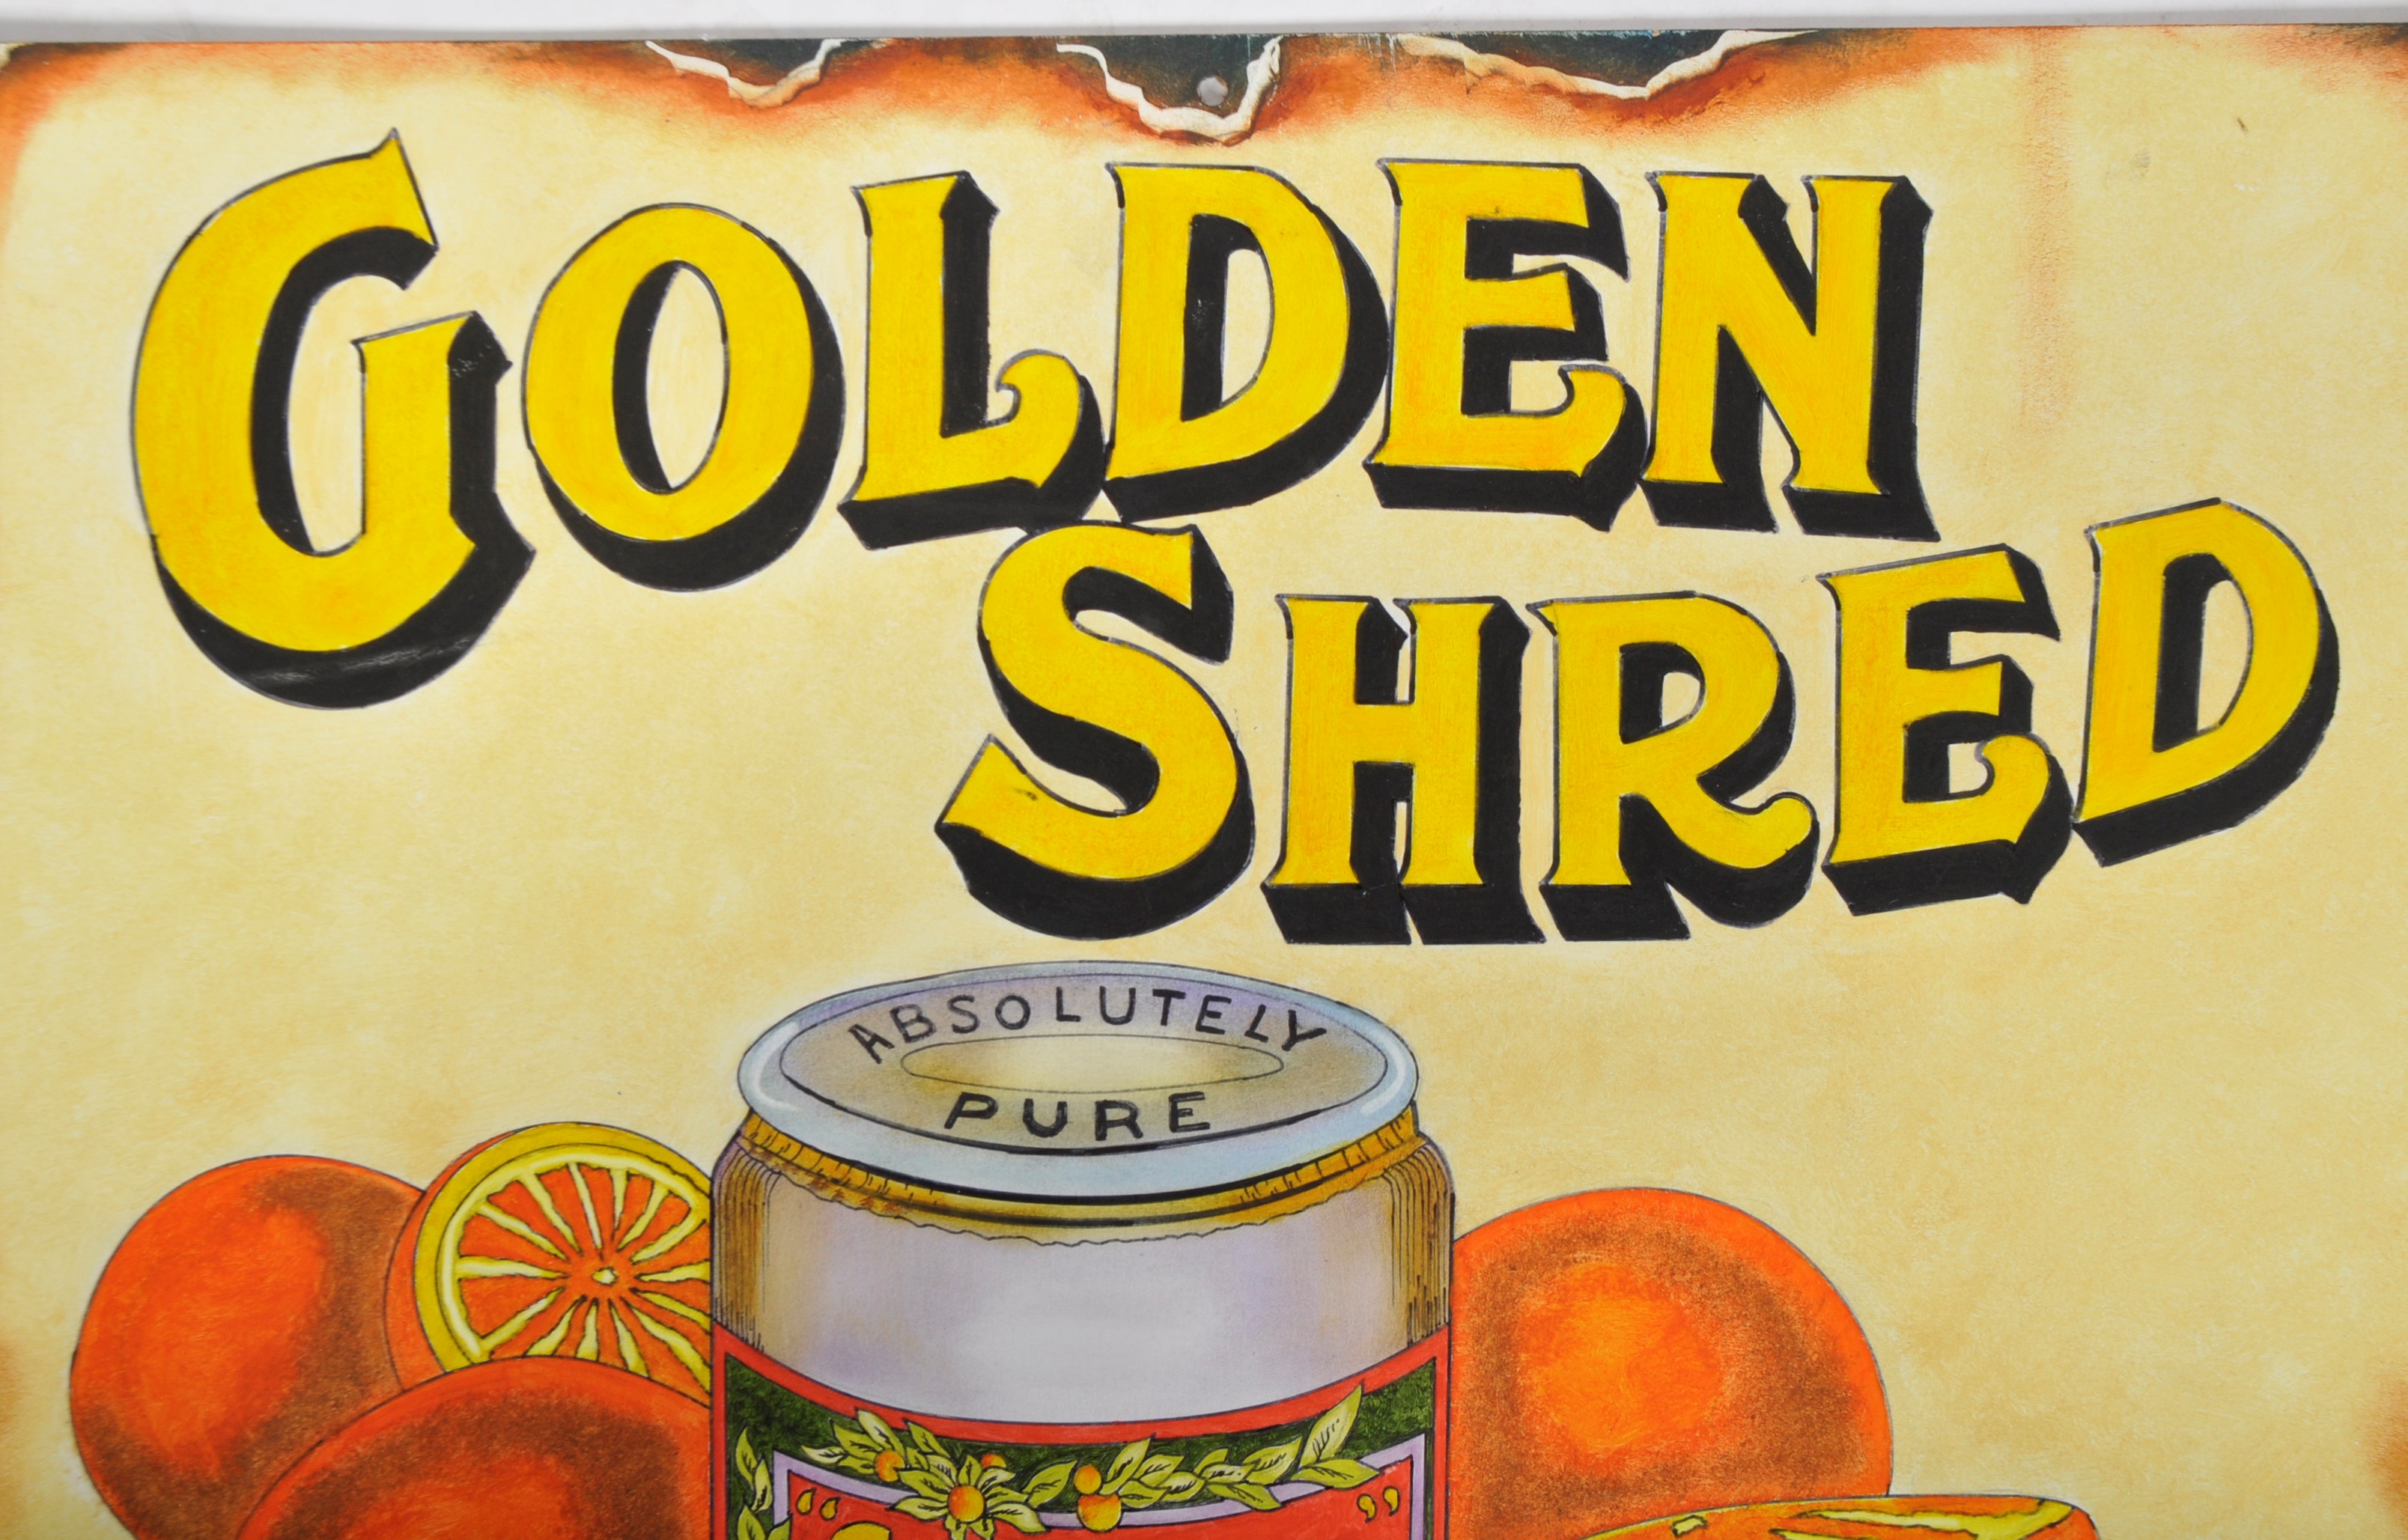 GOLDEN SHRED MARMALADE - LARGE OIL ON BOARD ADVERTISING SIGN - Image 2 of 7